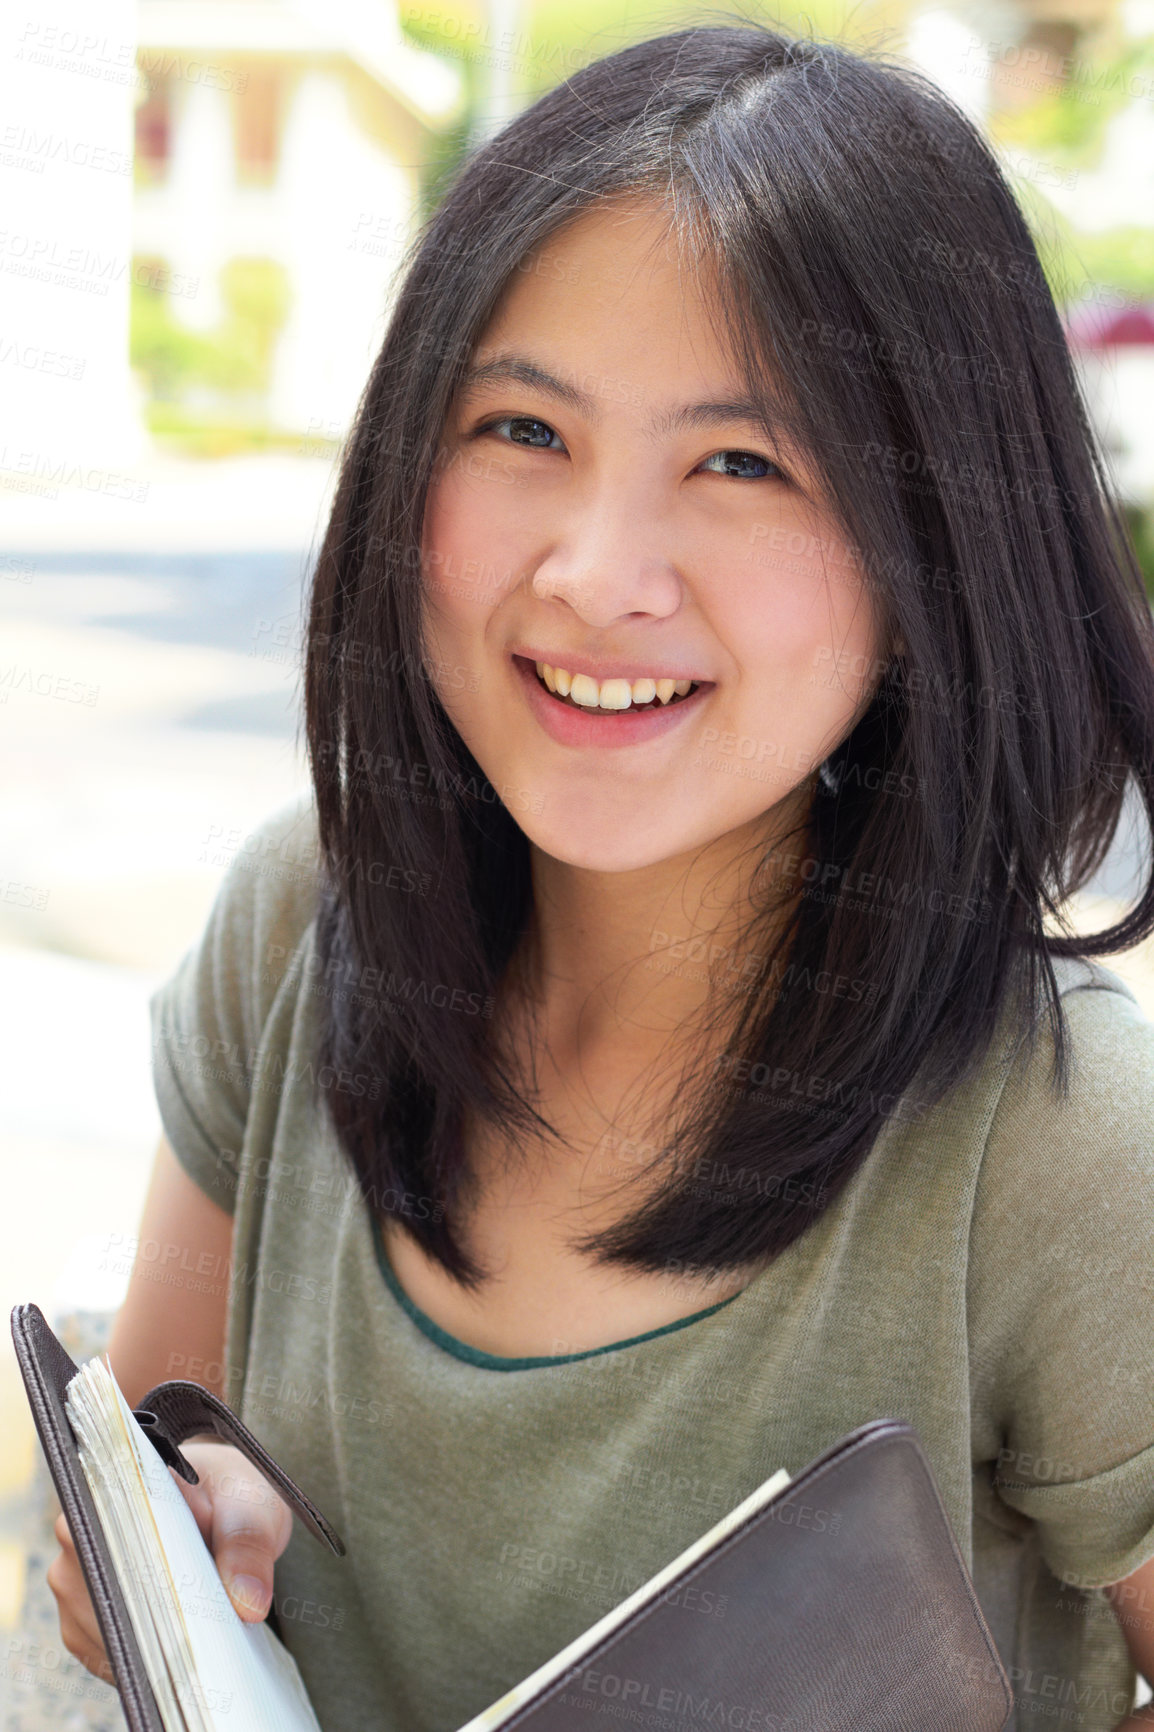 Buy stock photo Portrait, education and book with an asian woman student on university campus for learning or development. Study, smile or happy with a young female college pupil outdoor to study or learn in summer